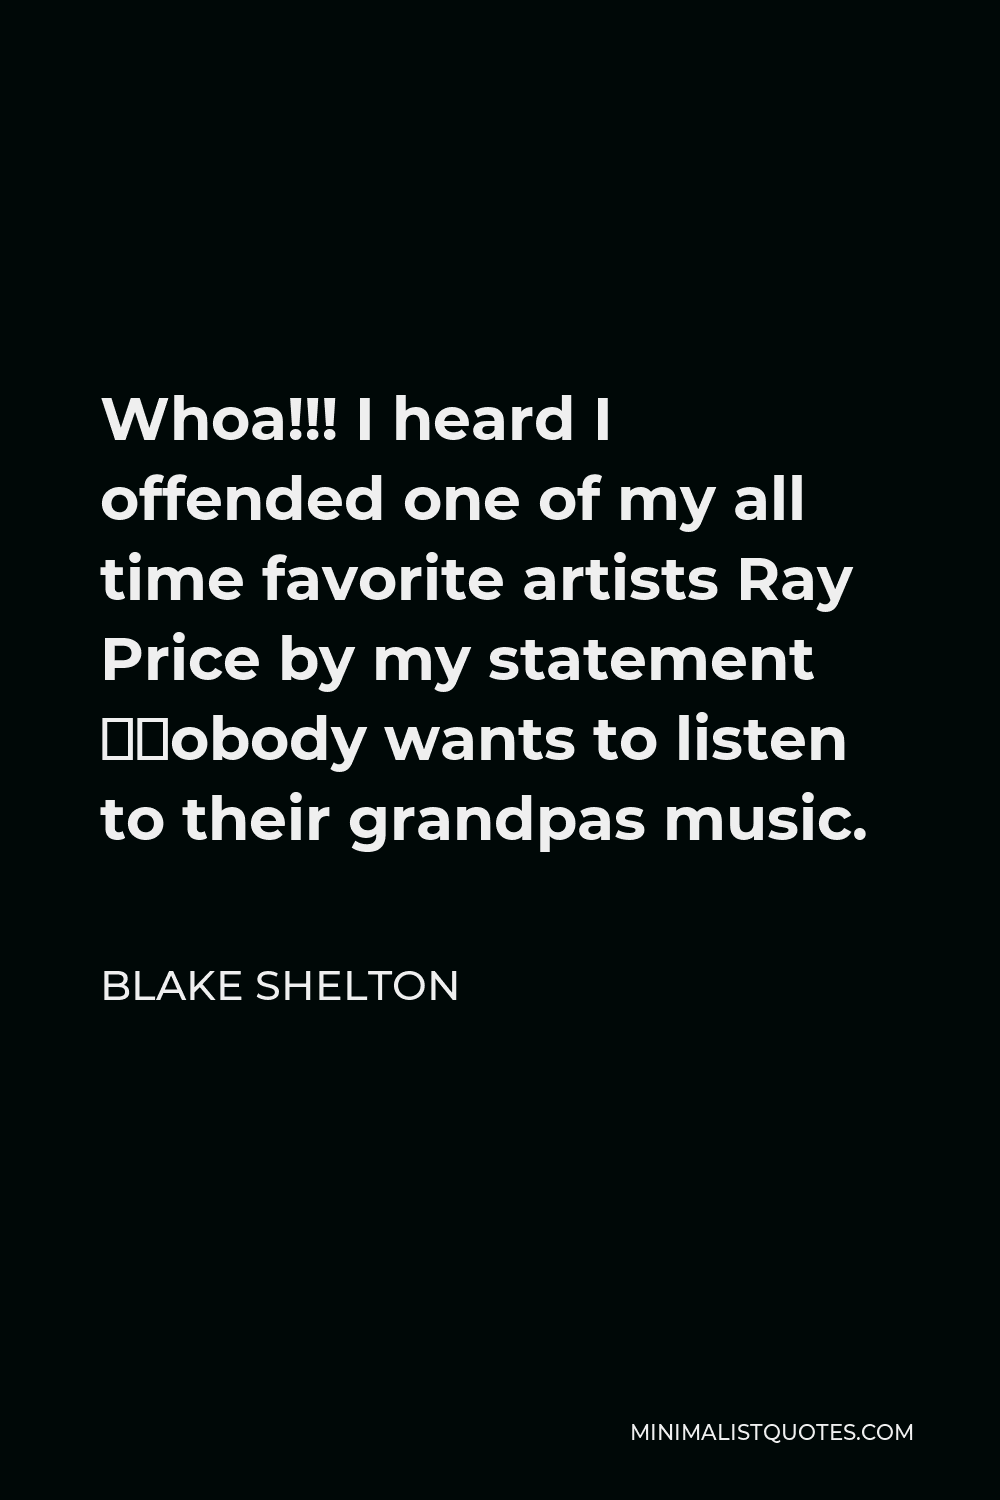 Blake Shelton Quote - Whoa!!! I heard I offended one of my all time favorite artists Ray Price by my statement “Nobody wants to listen to their grandpas music.